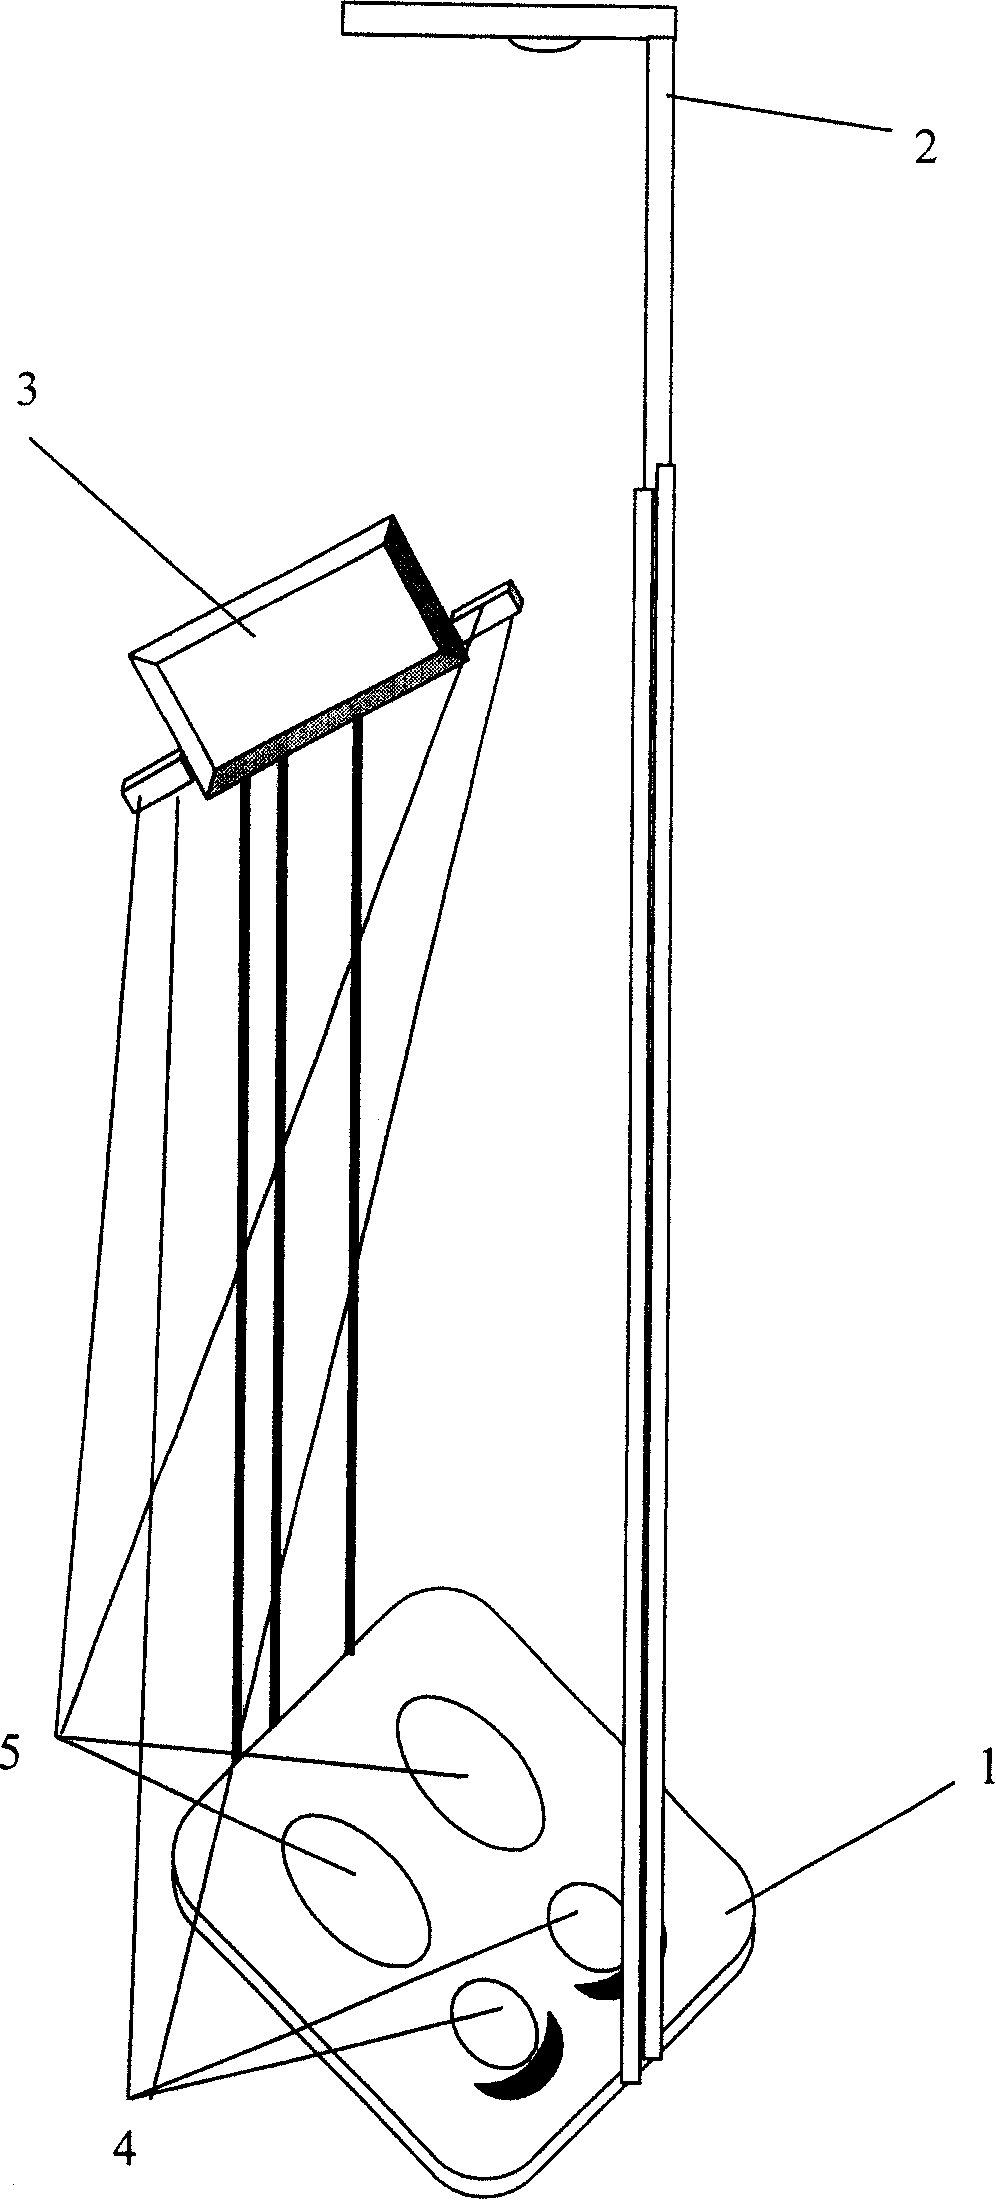 Apparatus for measuring fat in human body